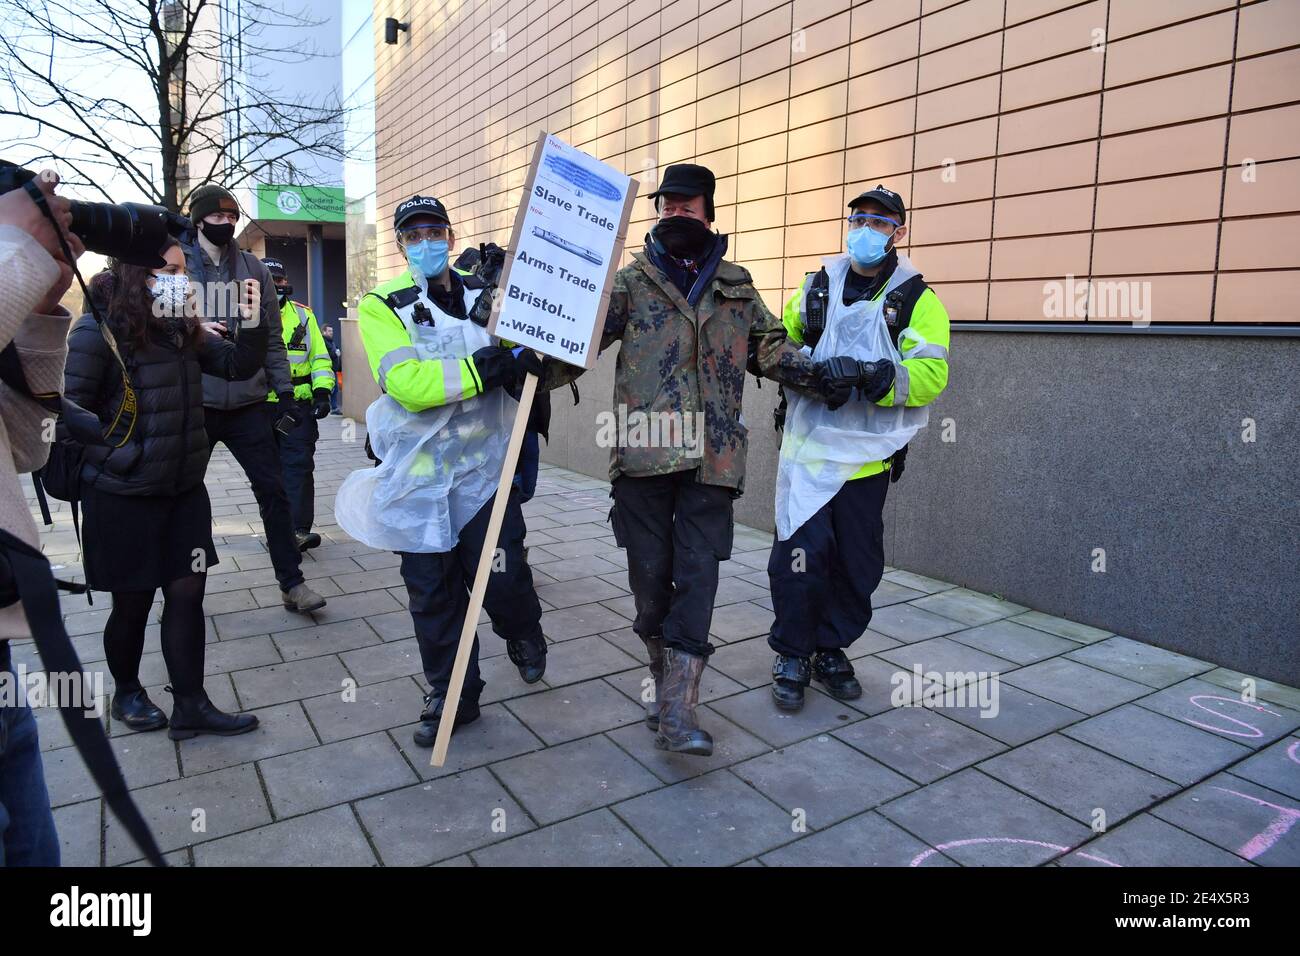 A protester is led away outside Bristol Magistrates' Court, where Rhian Graham, Milo Ponsford, Jake Skuse and Sage Willoughby are due to appear charged with criminal damage over the toppling of the Edward Colston statue in Bristol during the Black Lives Matter protests in June last year. Picture date: Monday January 25, 2021. Stock Photo